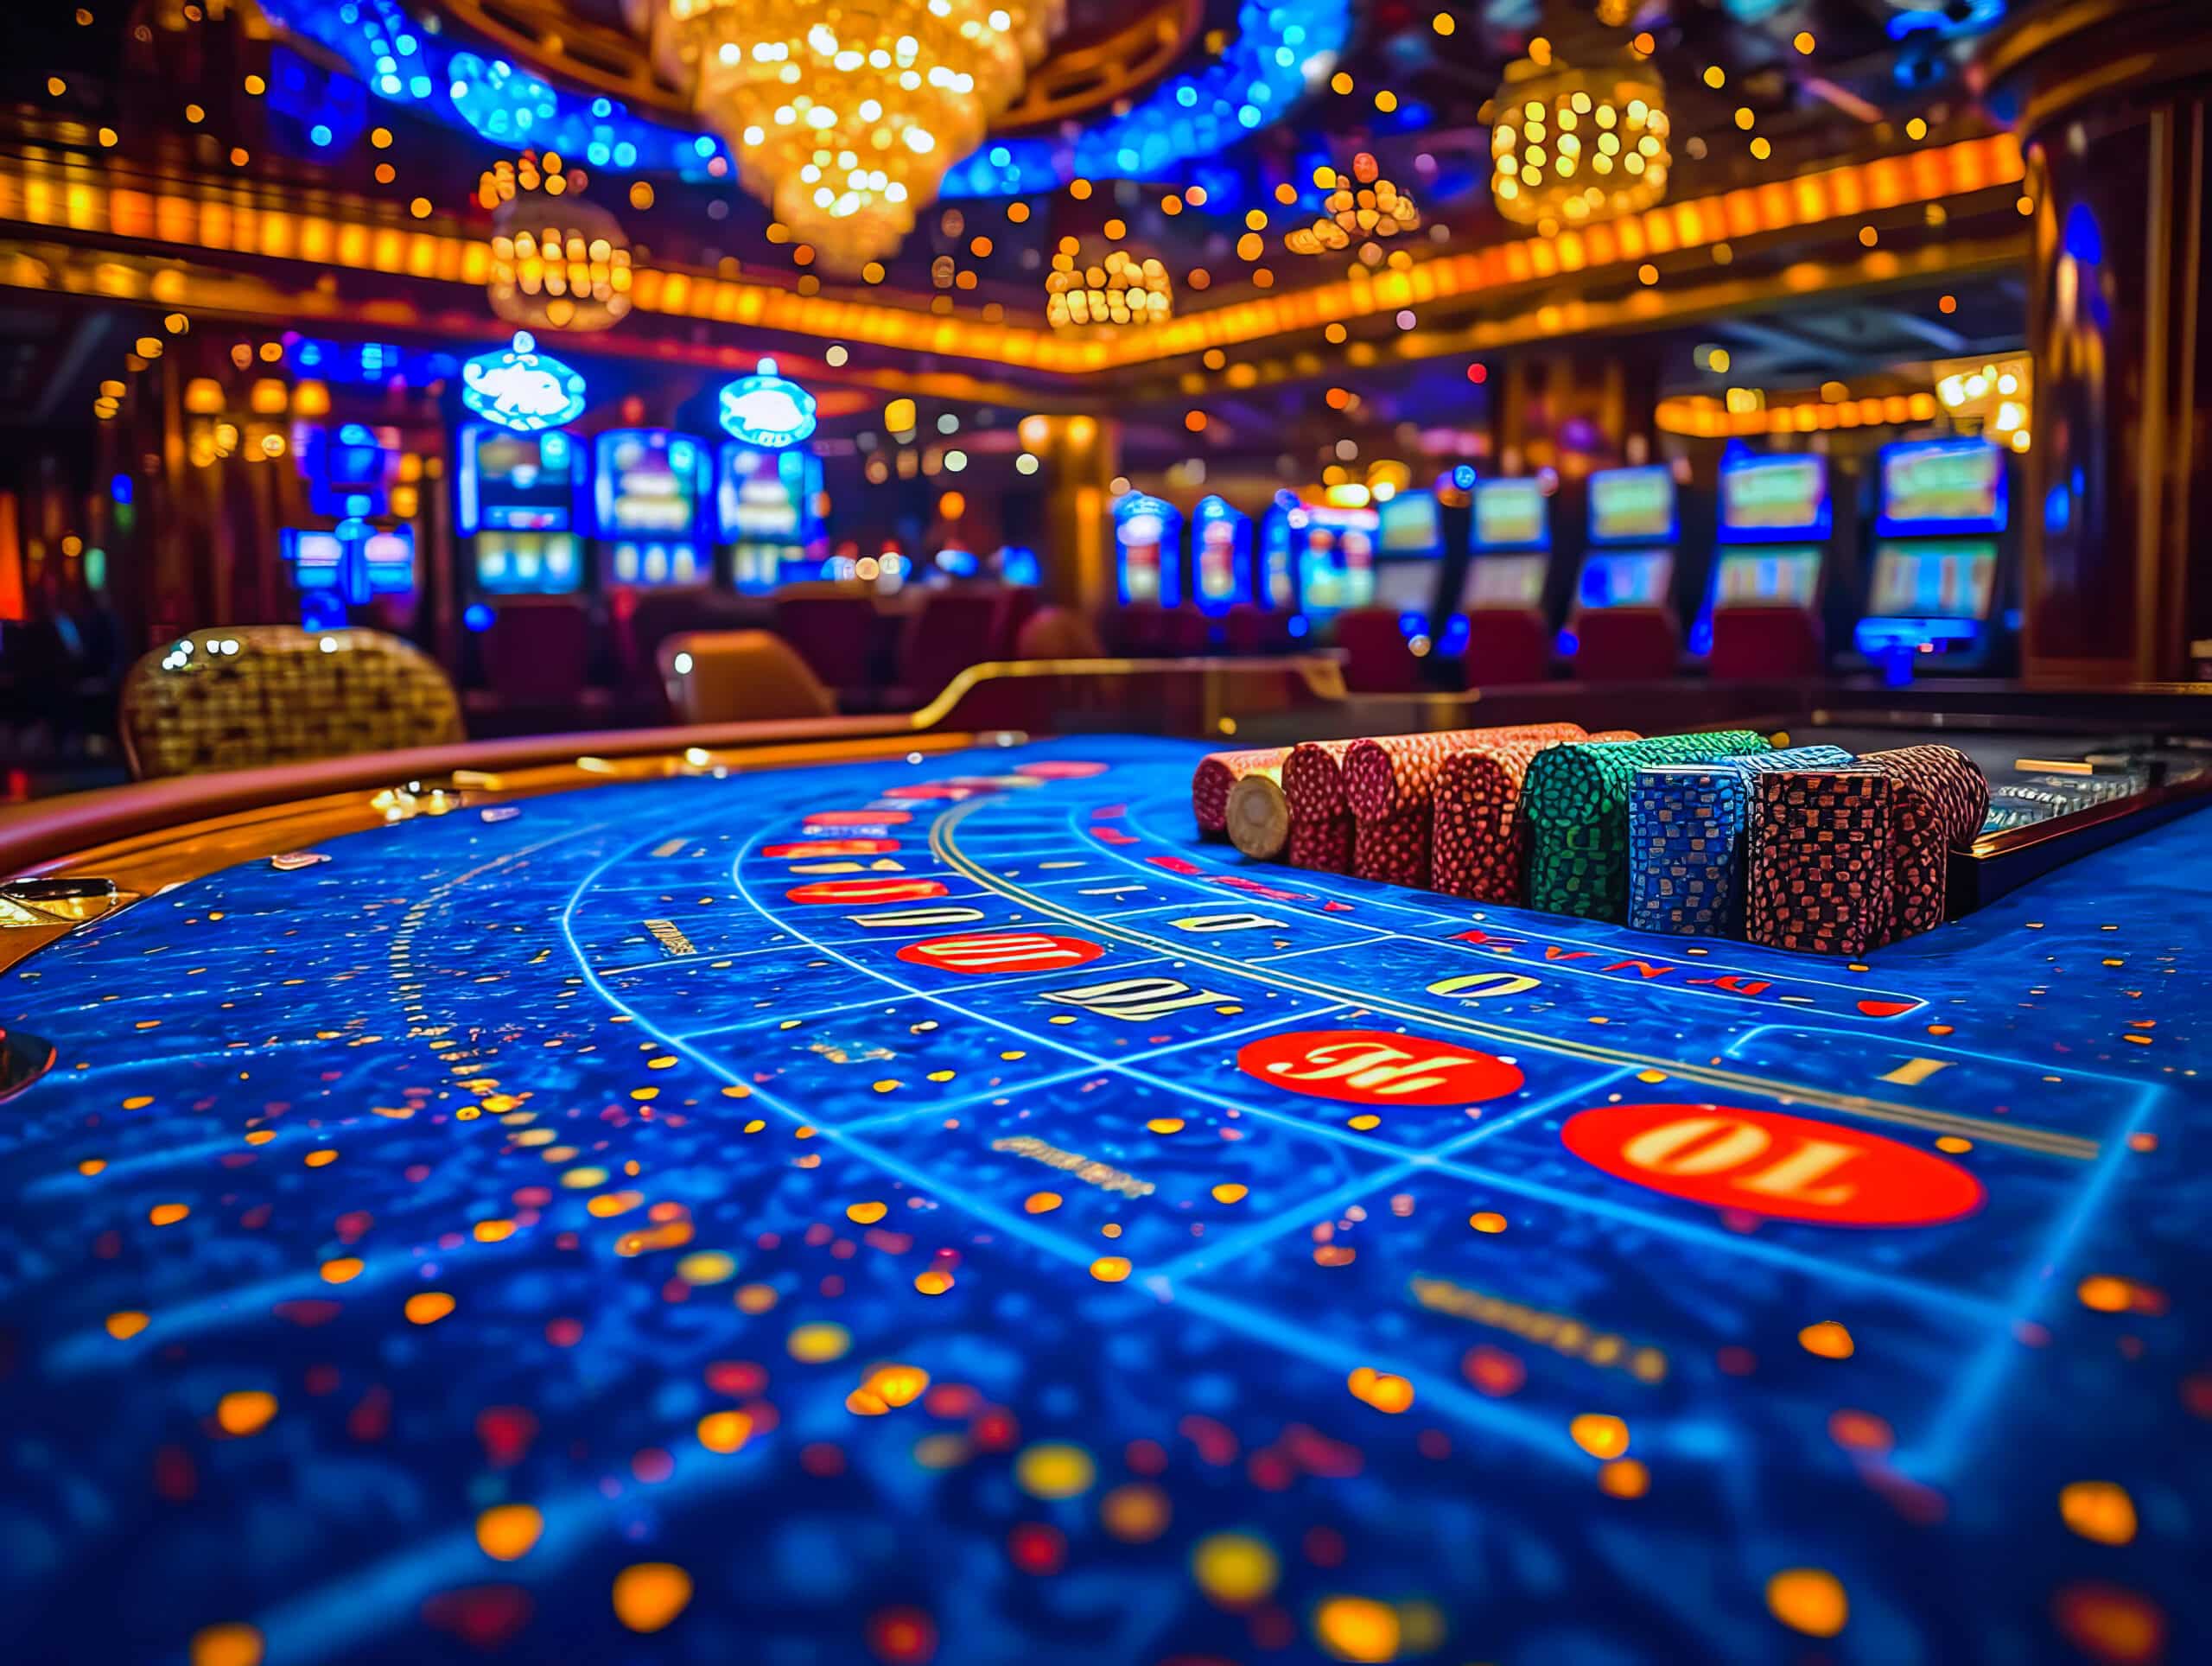 Gambling Edge: Casino Gaming Tables in the Glow of Bright Lights. AI-generated.